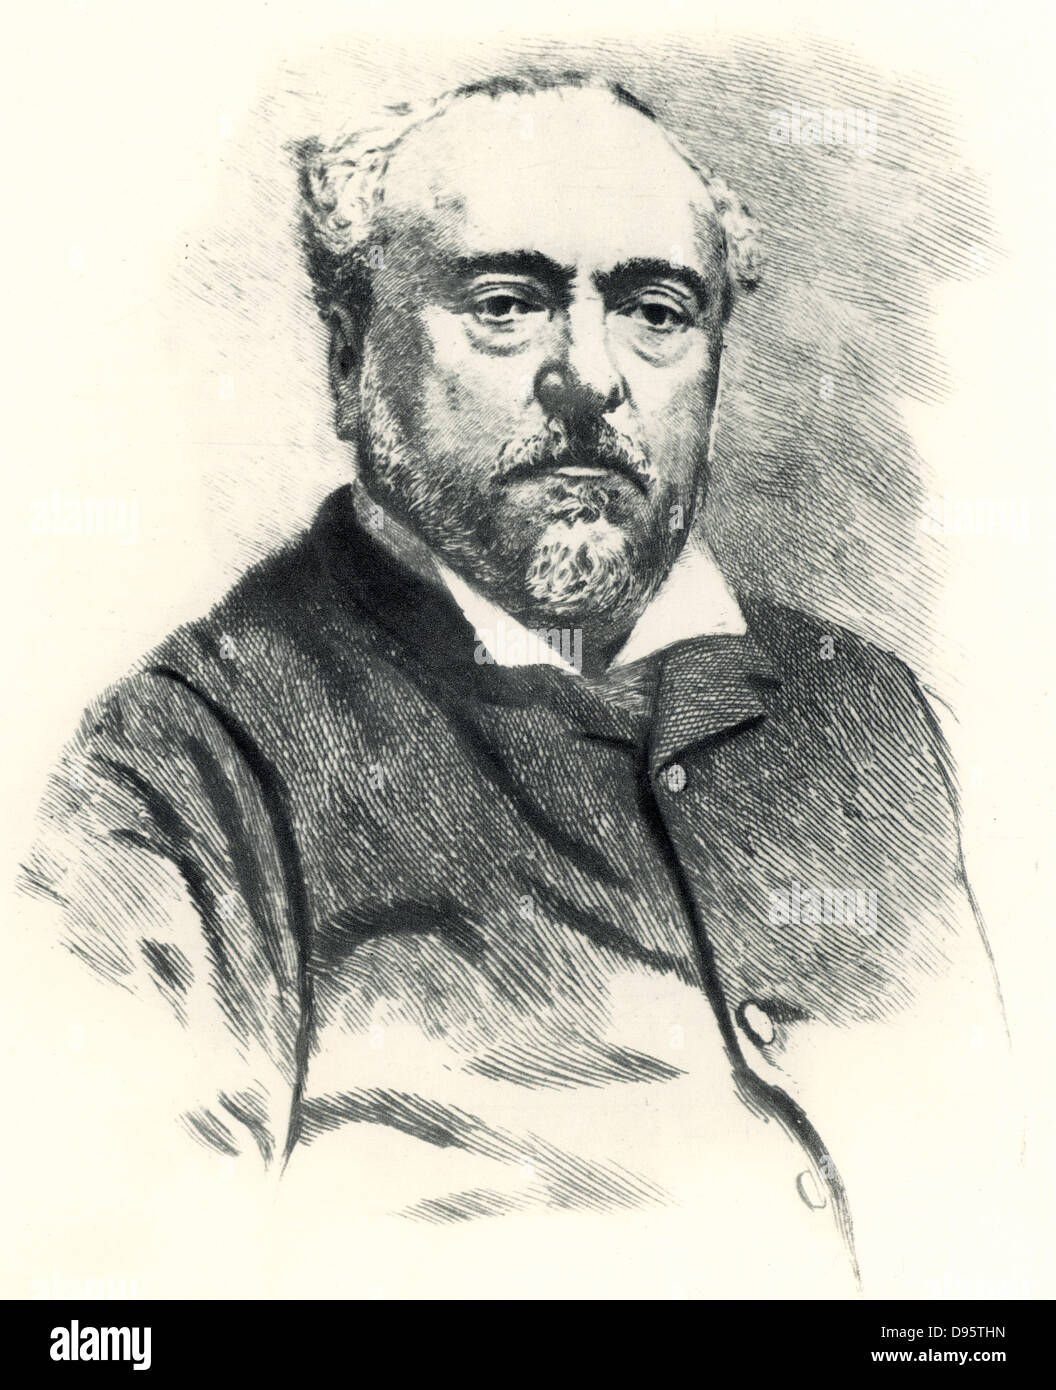 (Alexis) Emmanuel Chabrier (1841-1894). French composer. Stock Photo